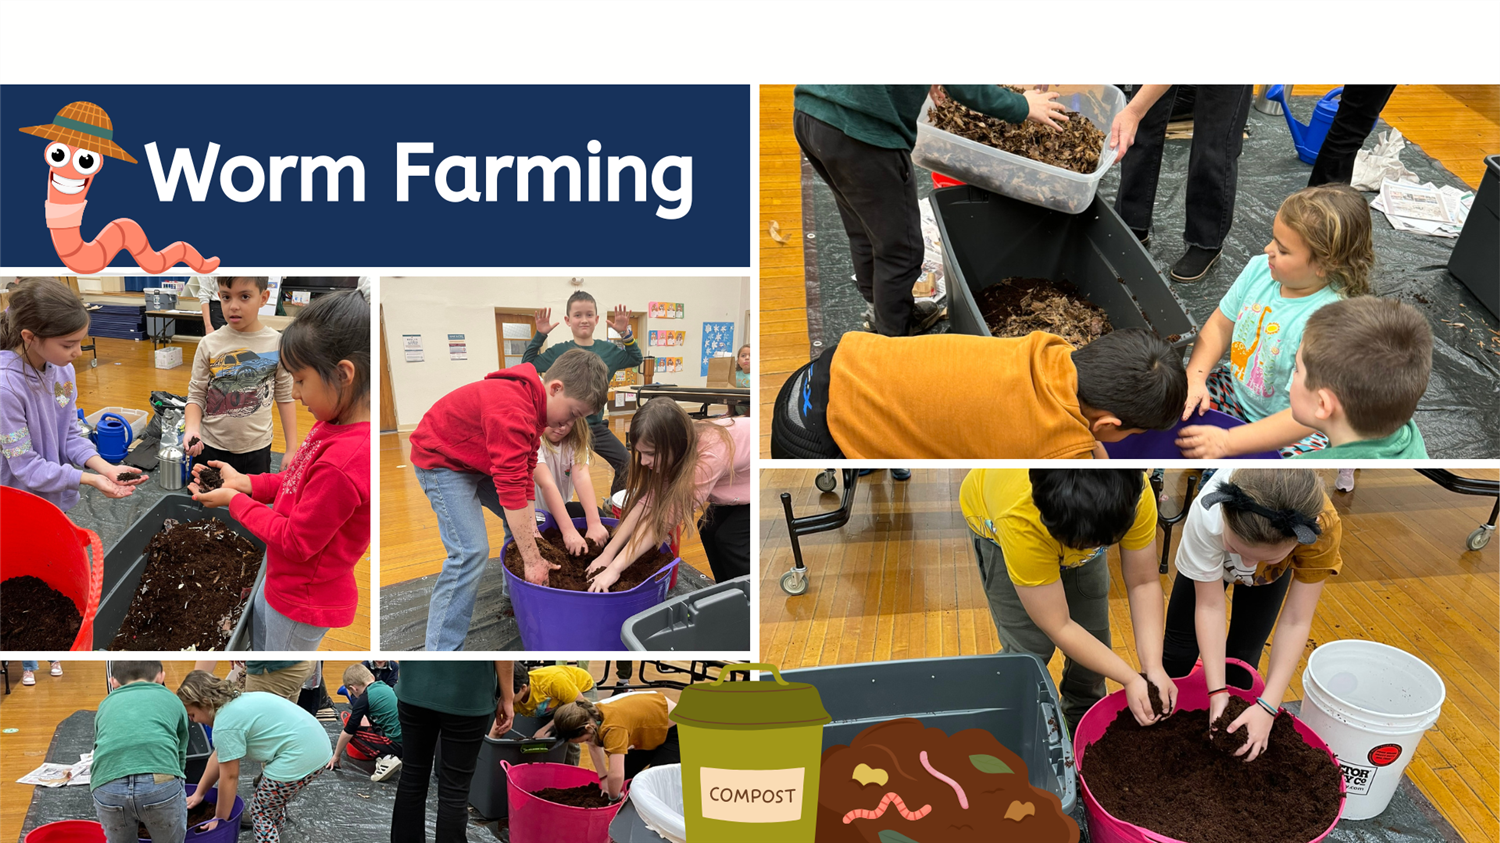 students worm farming in educational setting